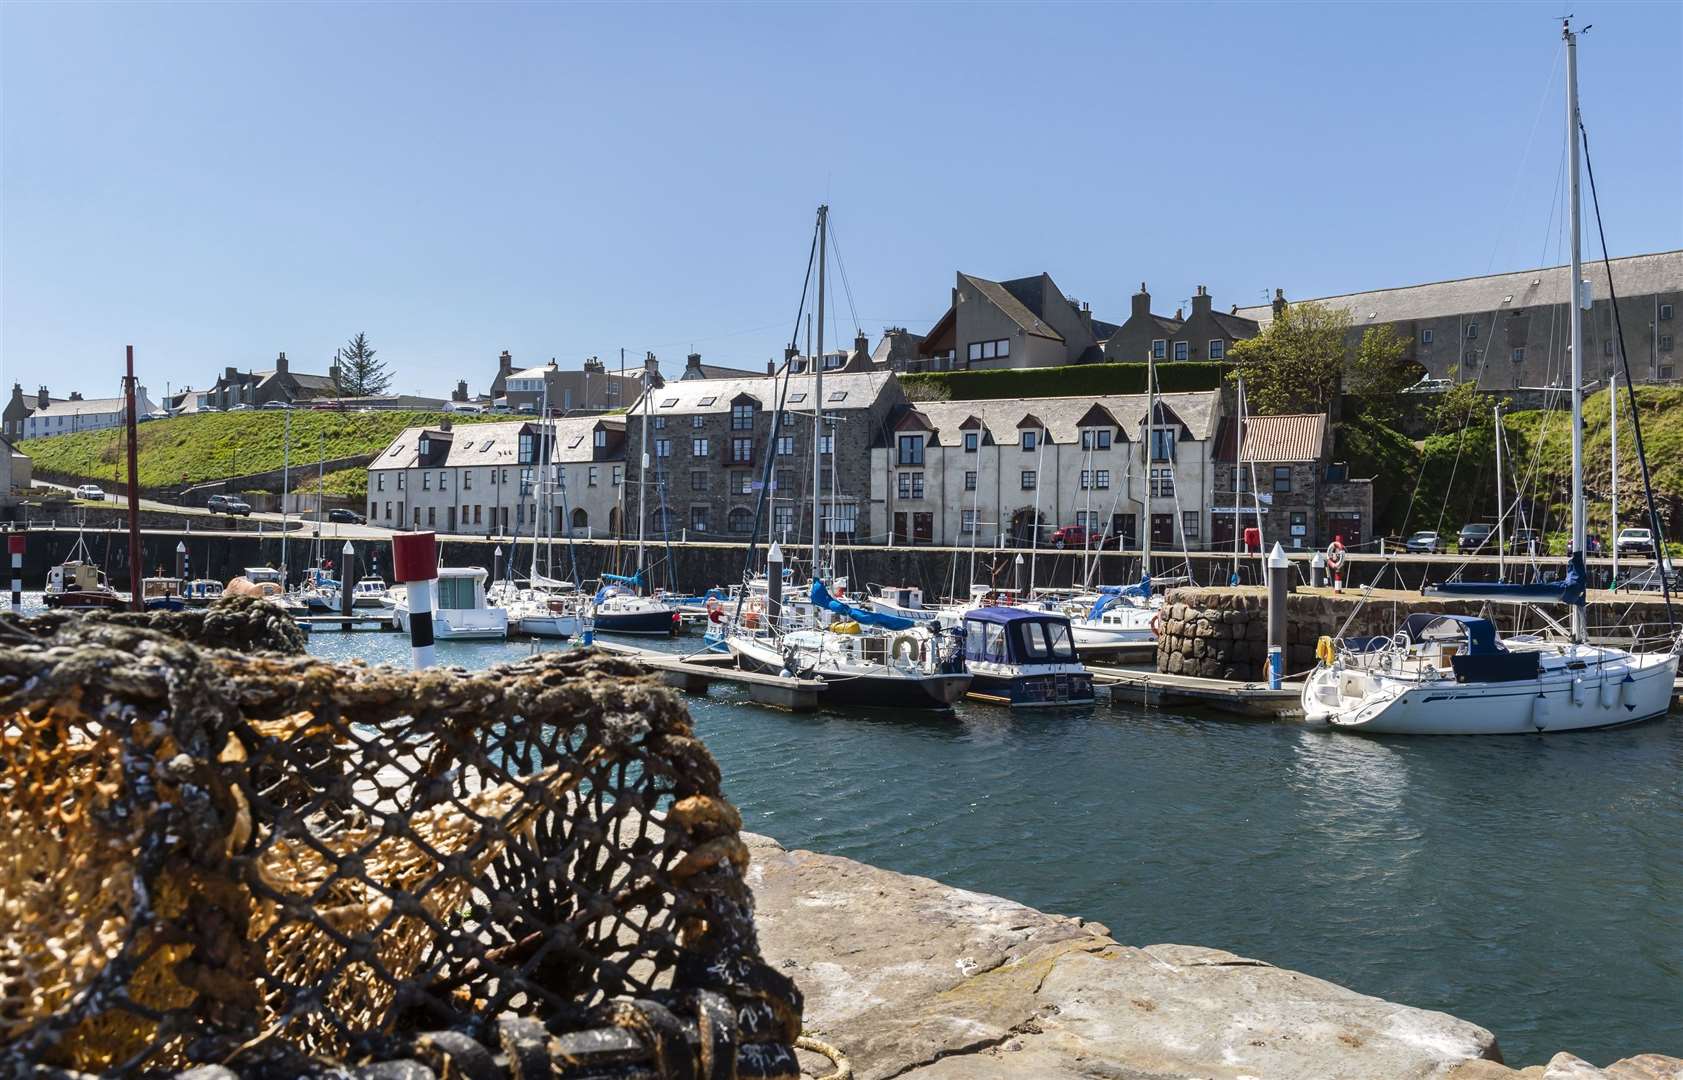 Plans for Banff harbour have been approved by the council.